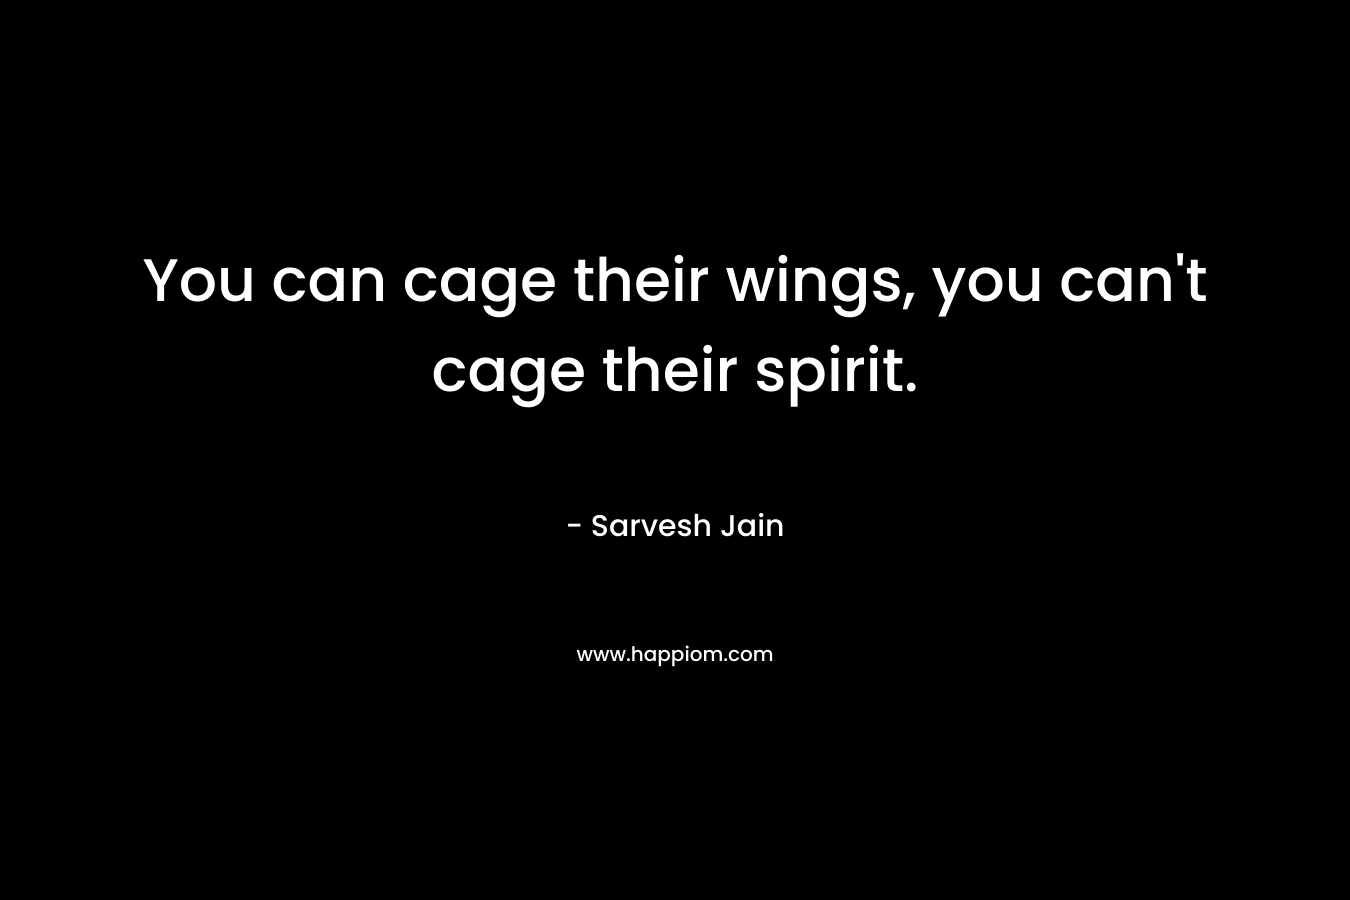 You can cage their wings, you can't cage their spirit.